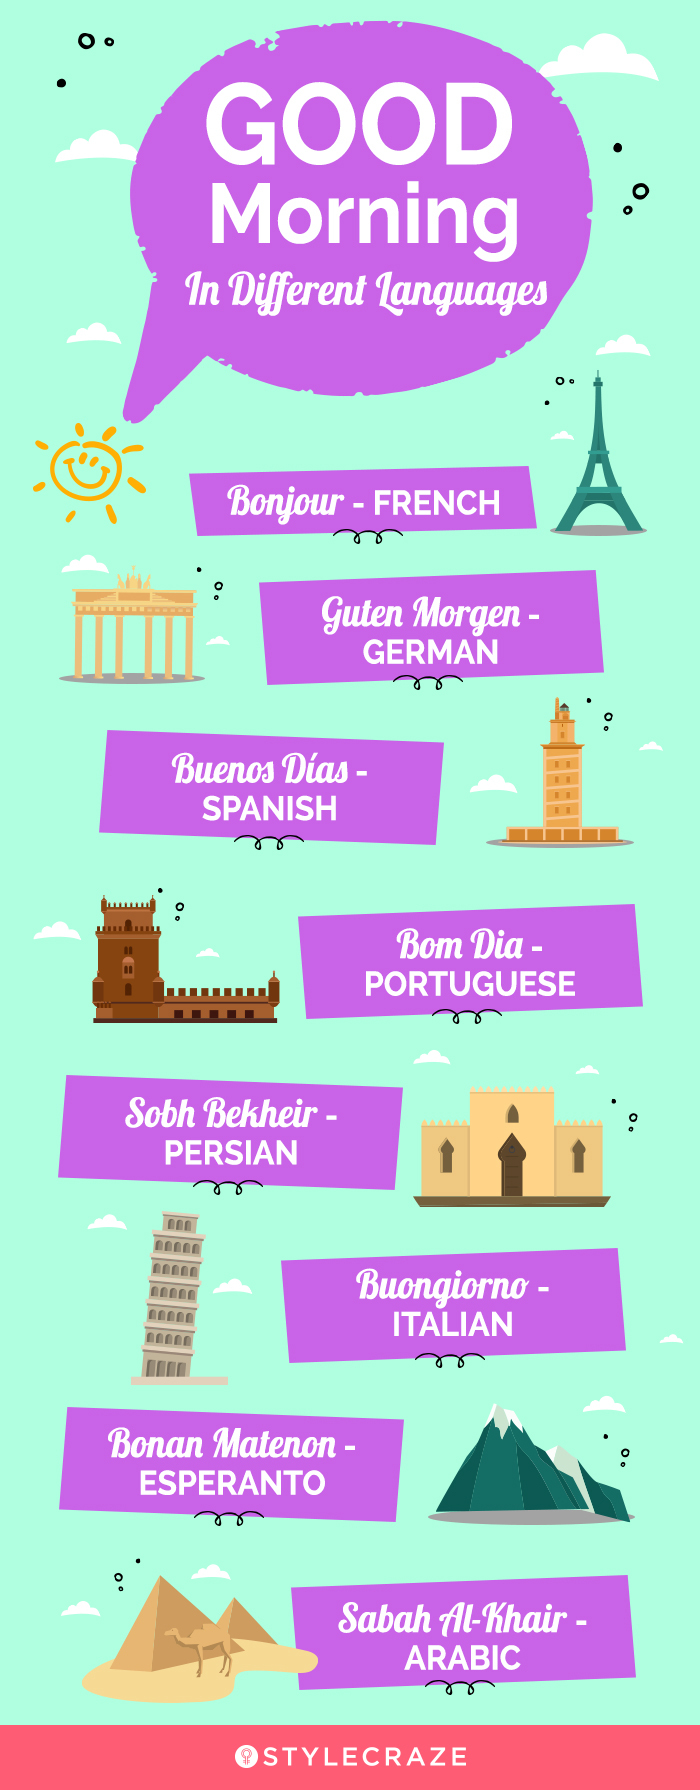 good morning in different languages (infographic)